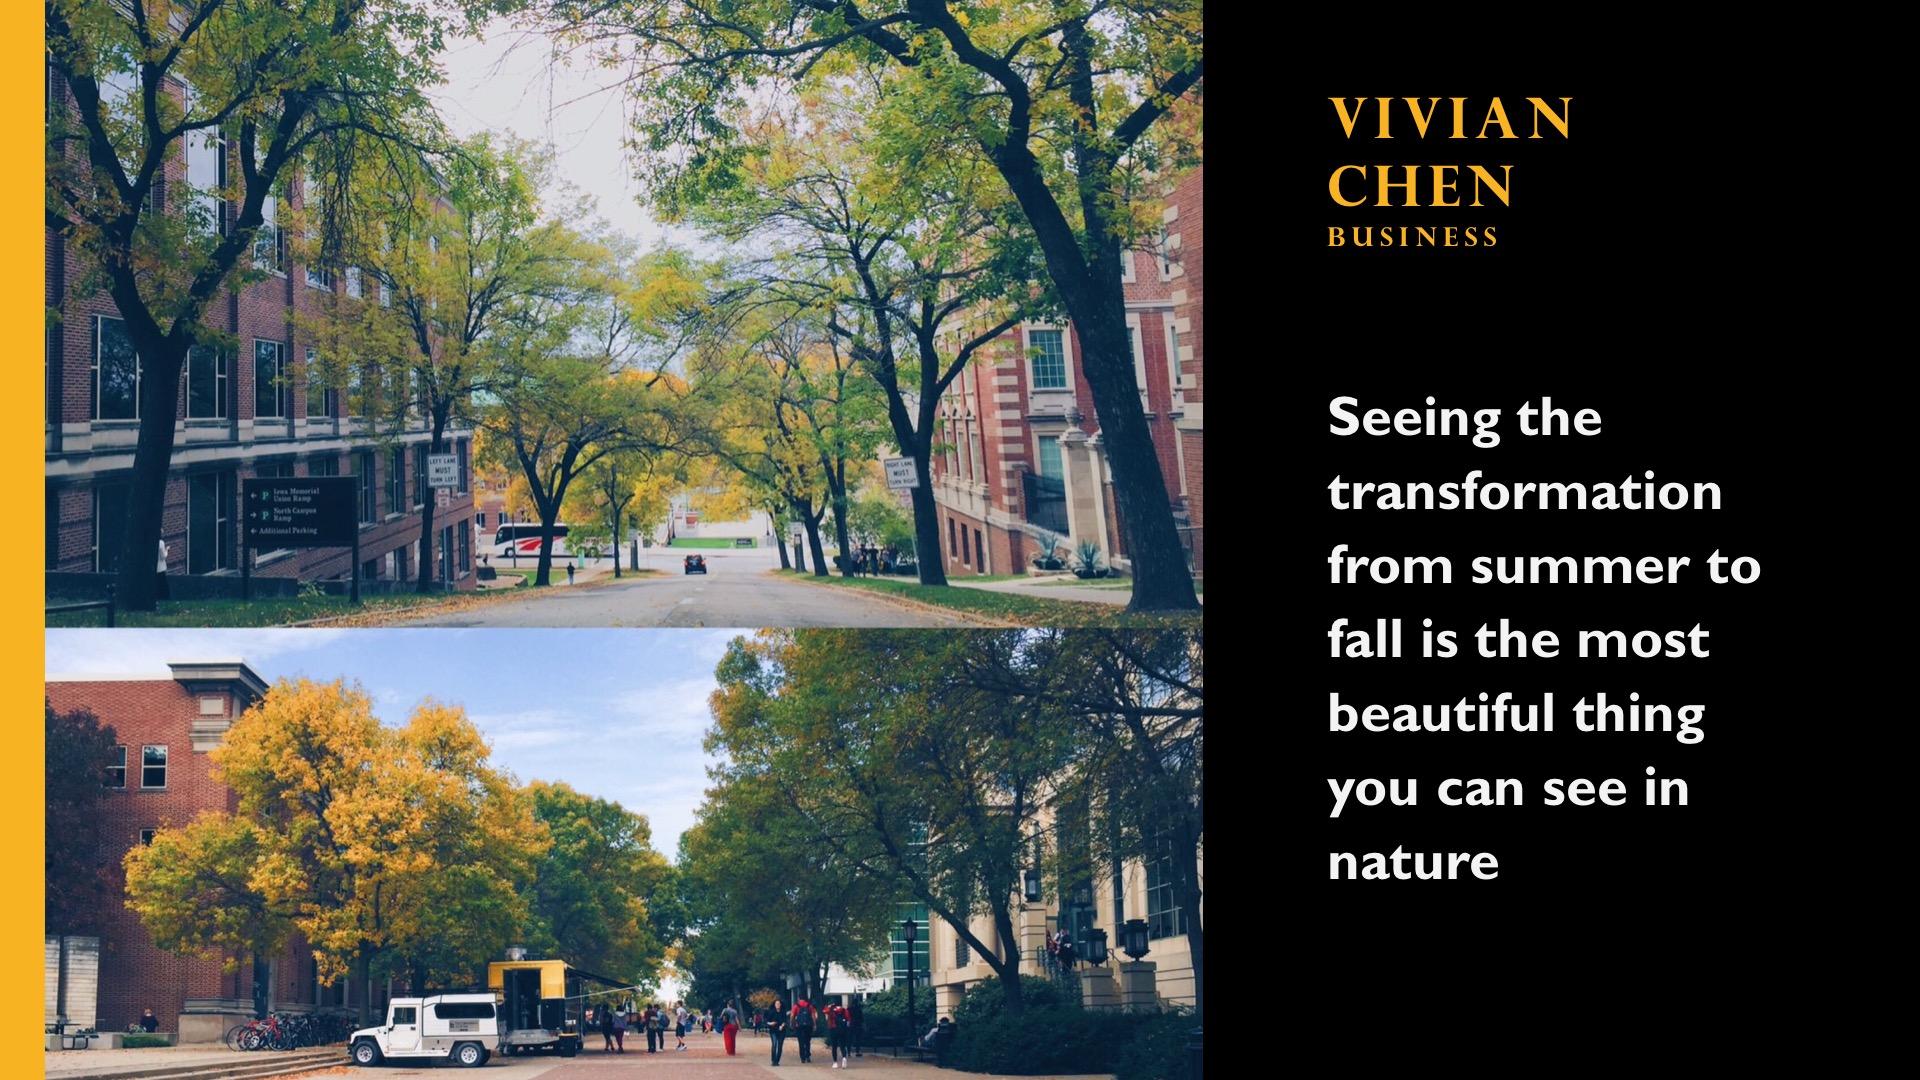 Vivian Chen. Business. Seeing the transformation from summer to fall is the most beautiful thing you can see in nature.